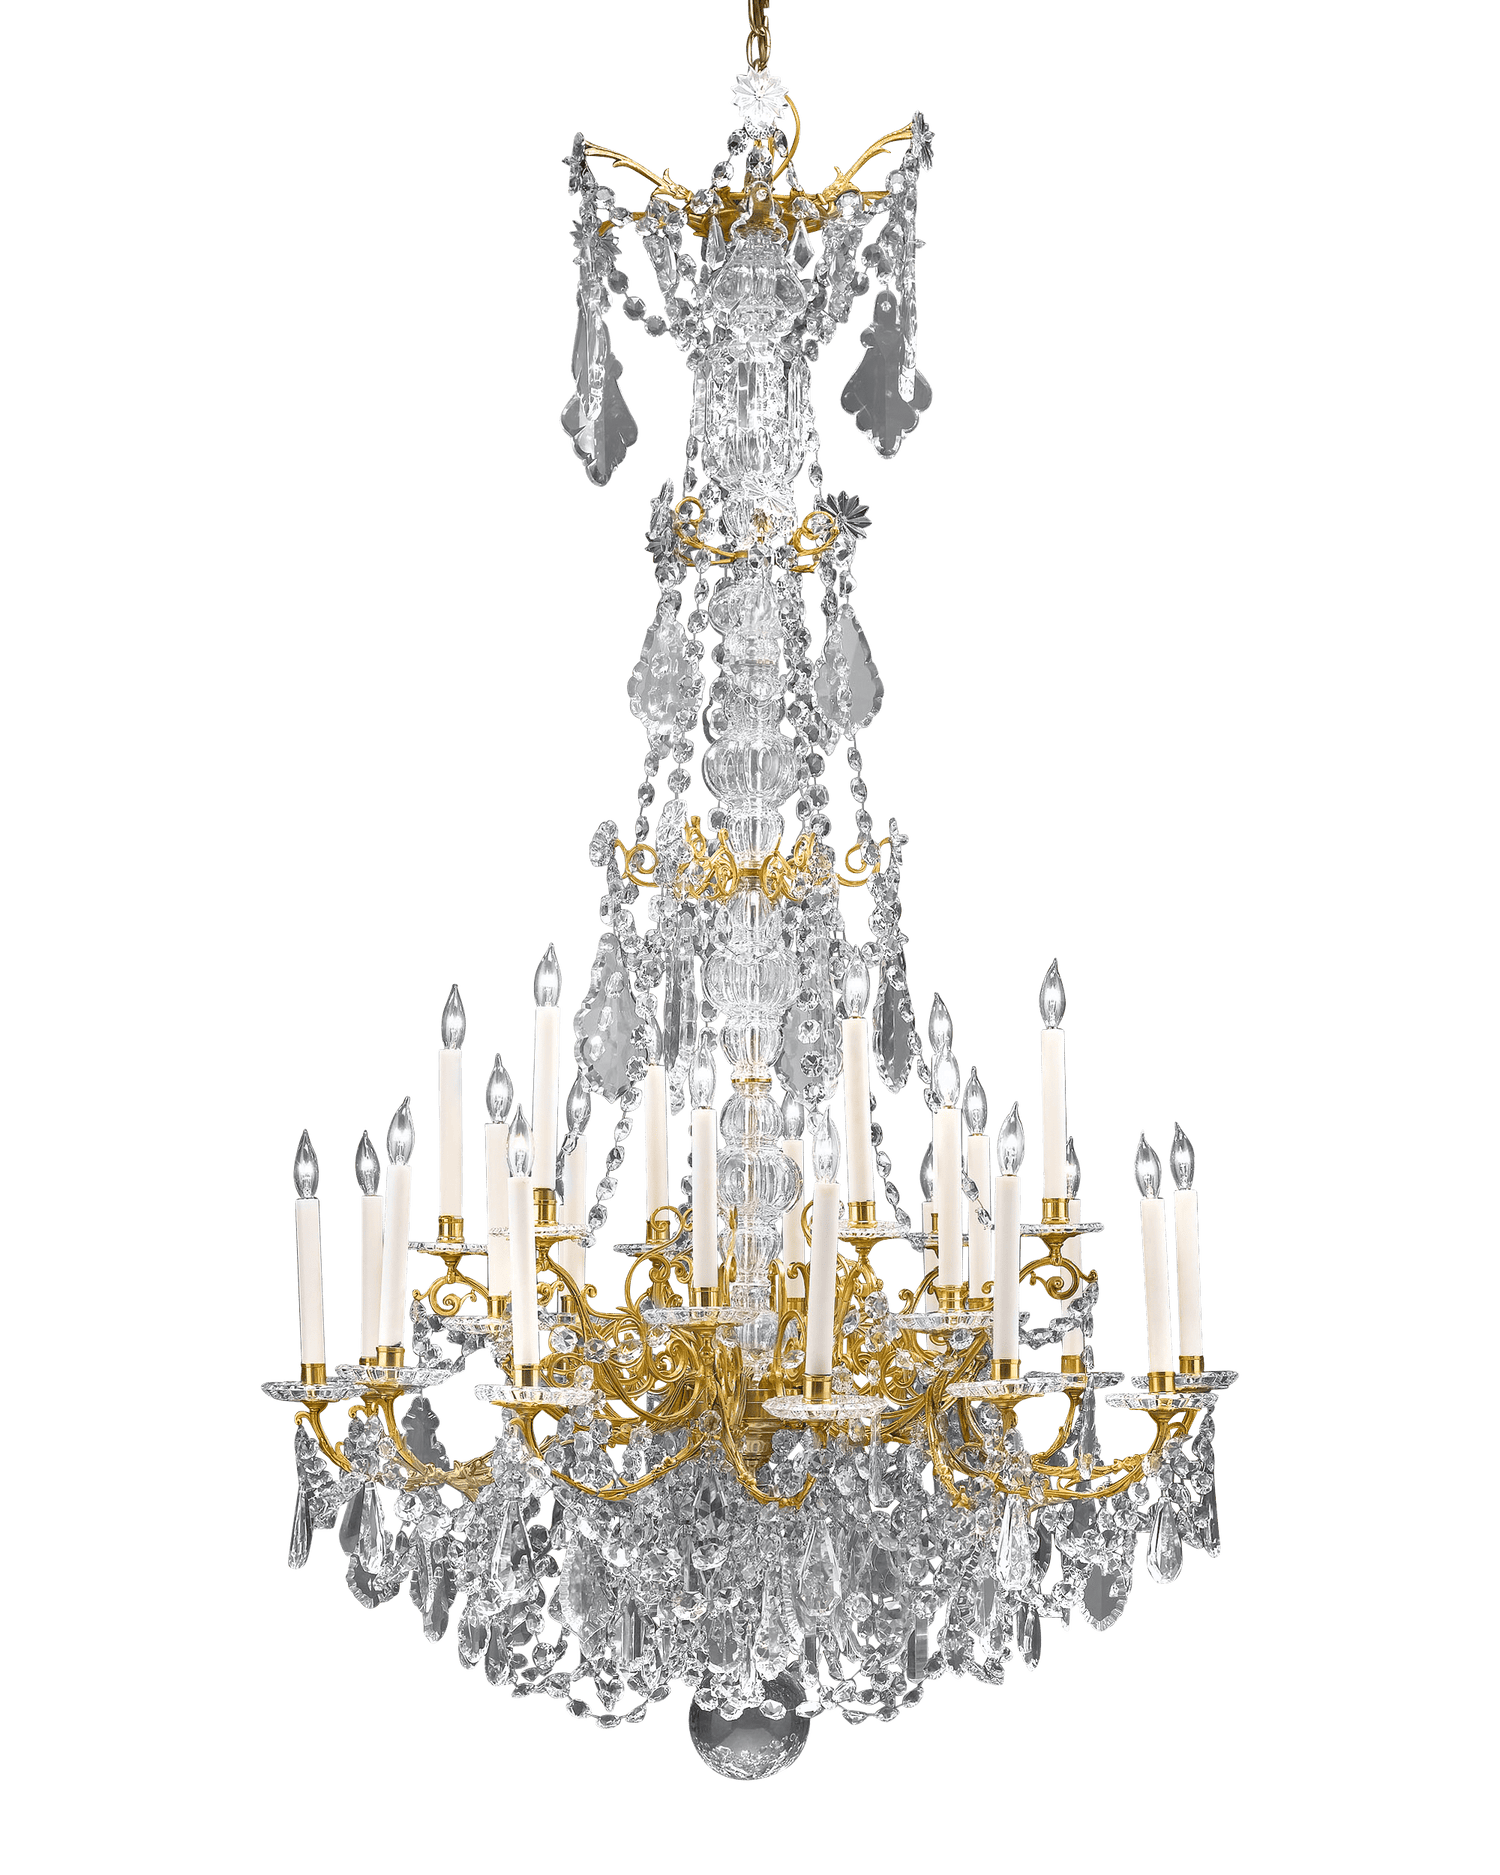 A substantially-sized Baccarat crystal chandelier of exceptional quality